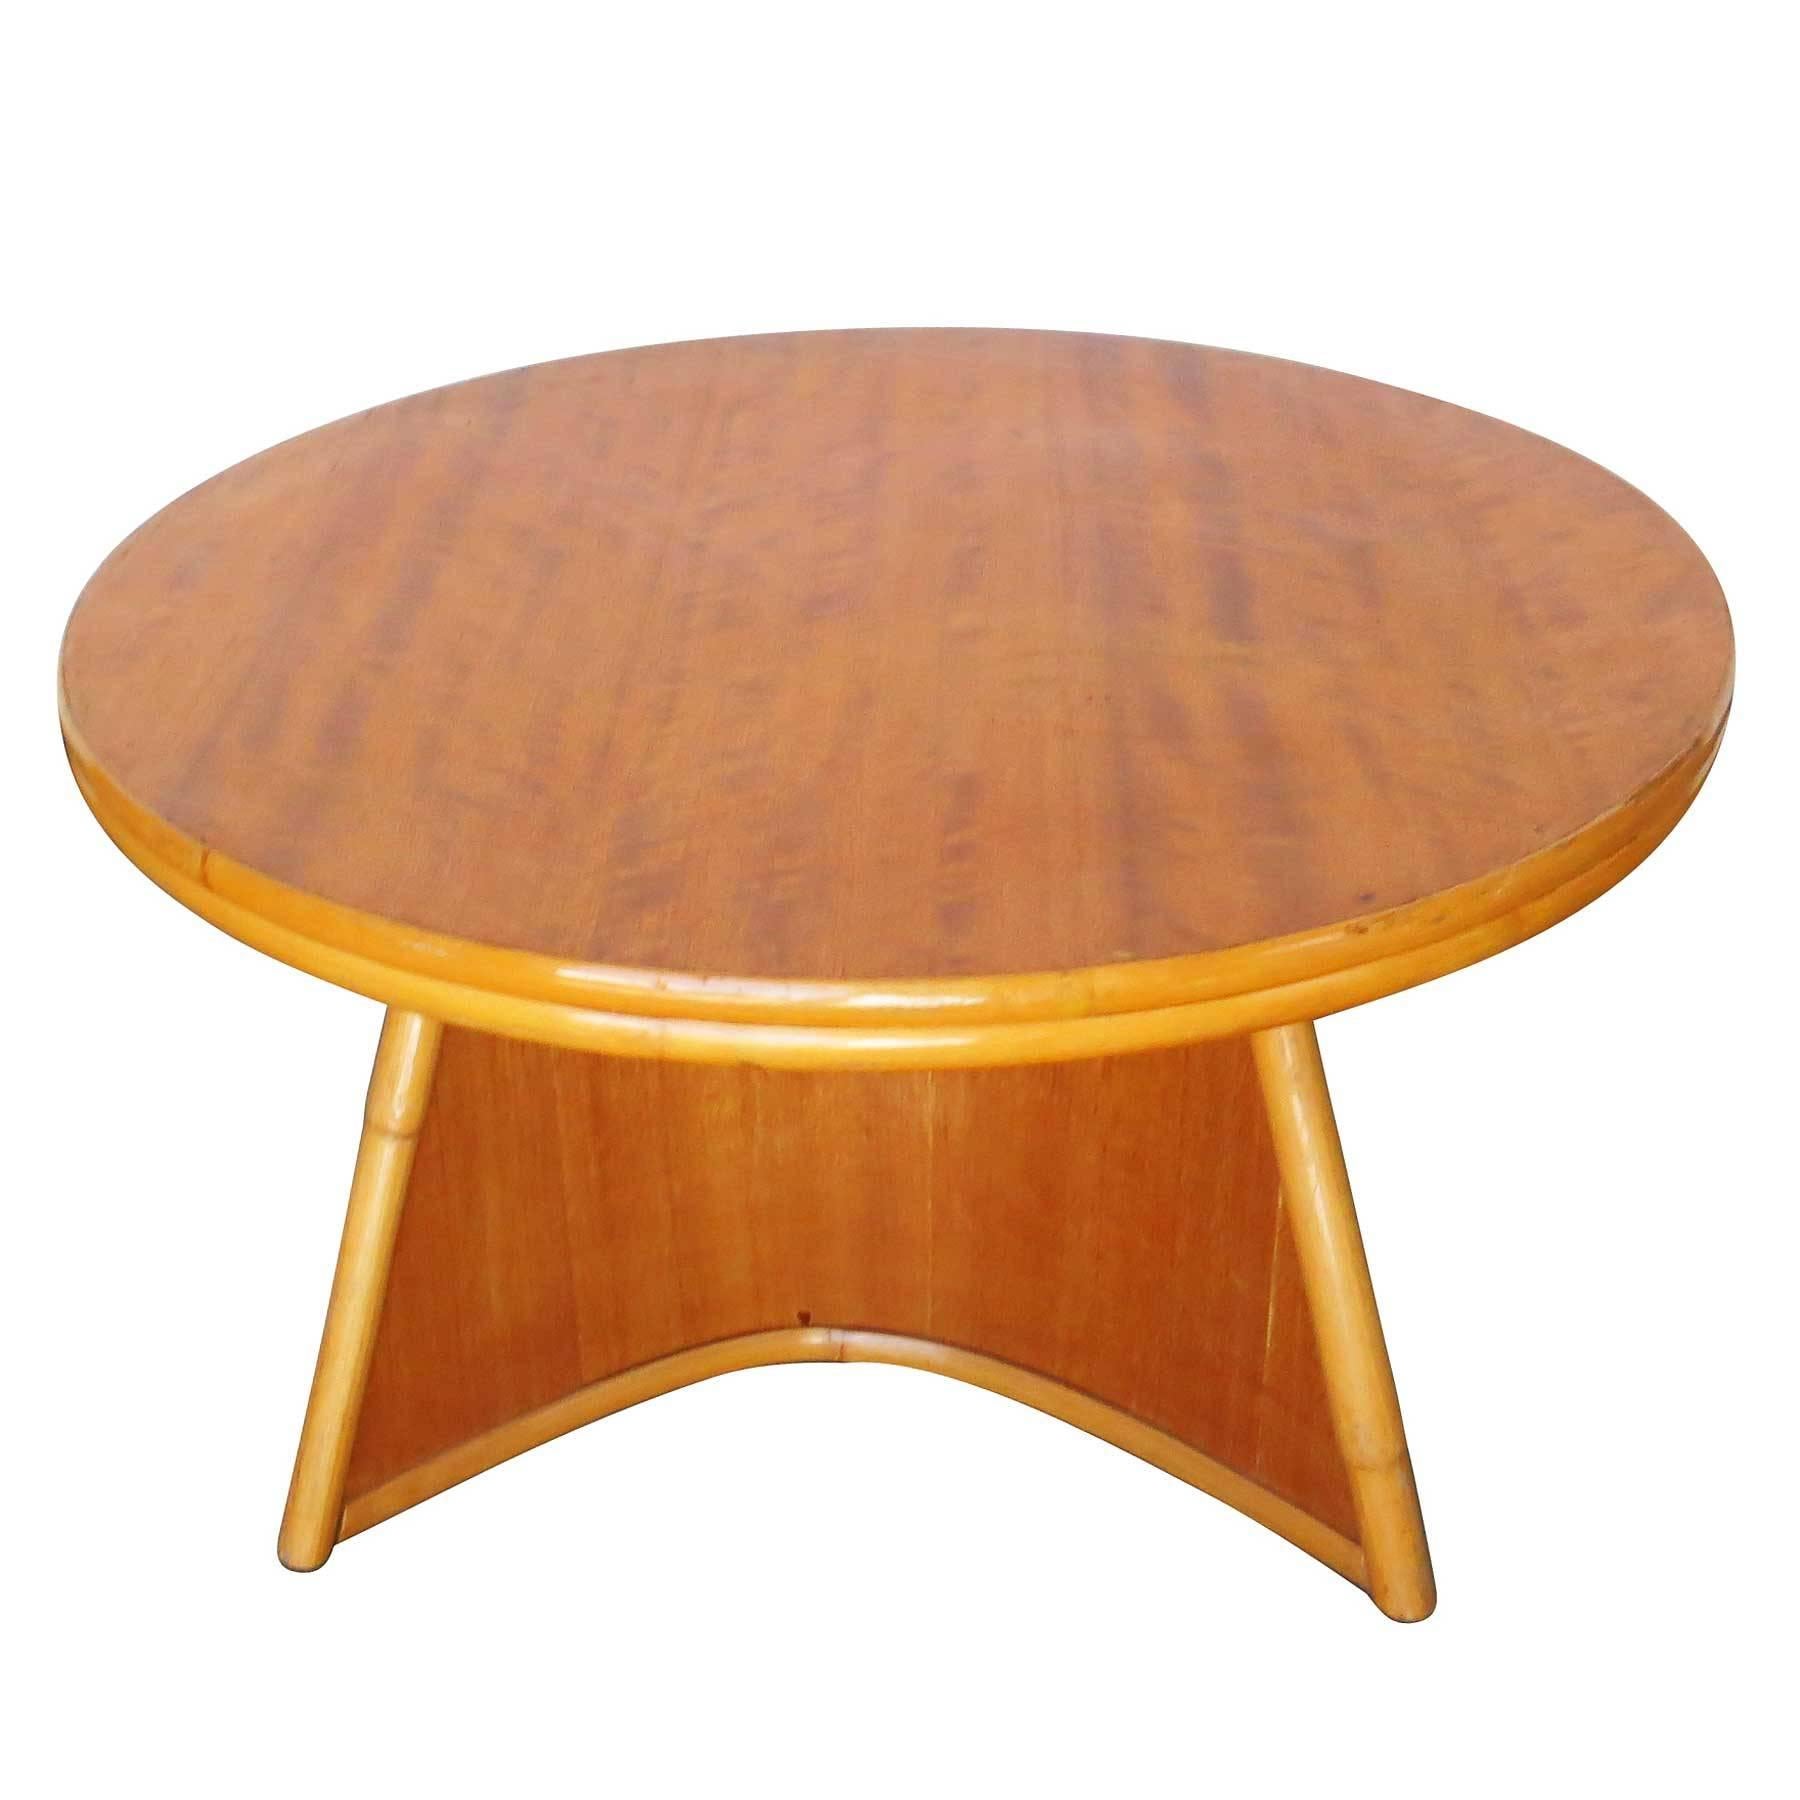 Set of three living room tables by Herbert and Shirley Ritts for the Rittz Furniture company. This set includes a round center table, a Biomorphic coffee table and a large two-tier table.

The bent mahogany with rattan borders complement the simple